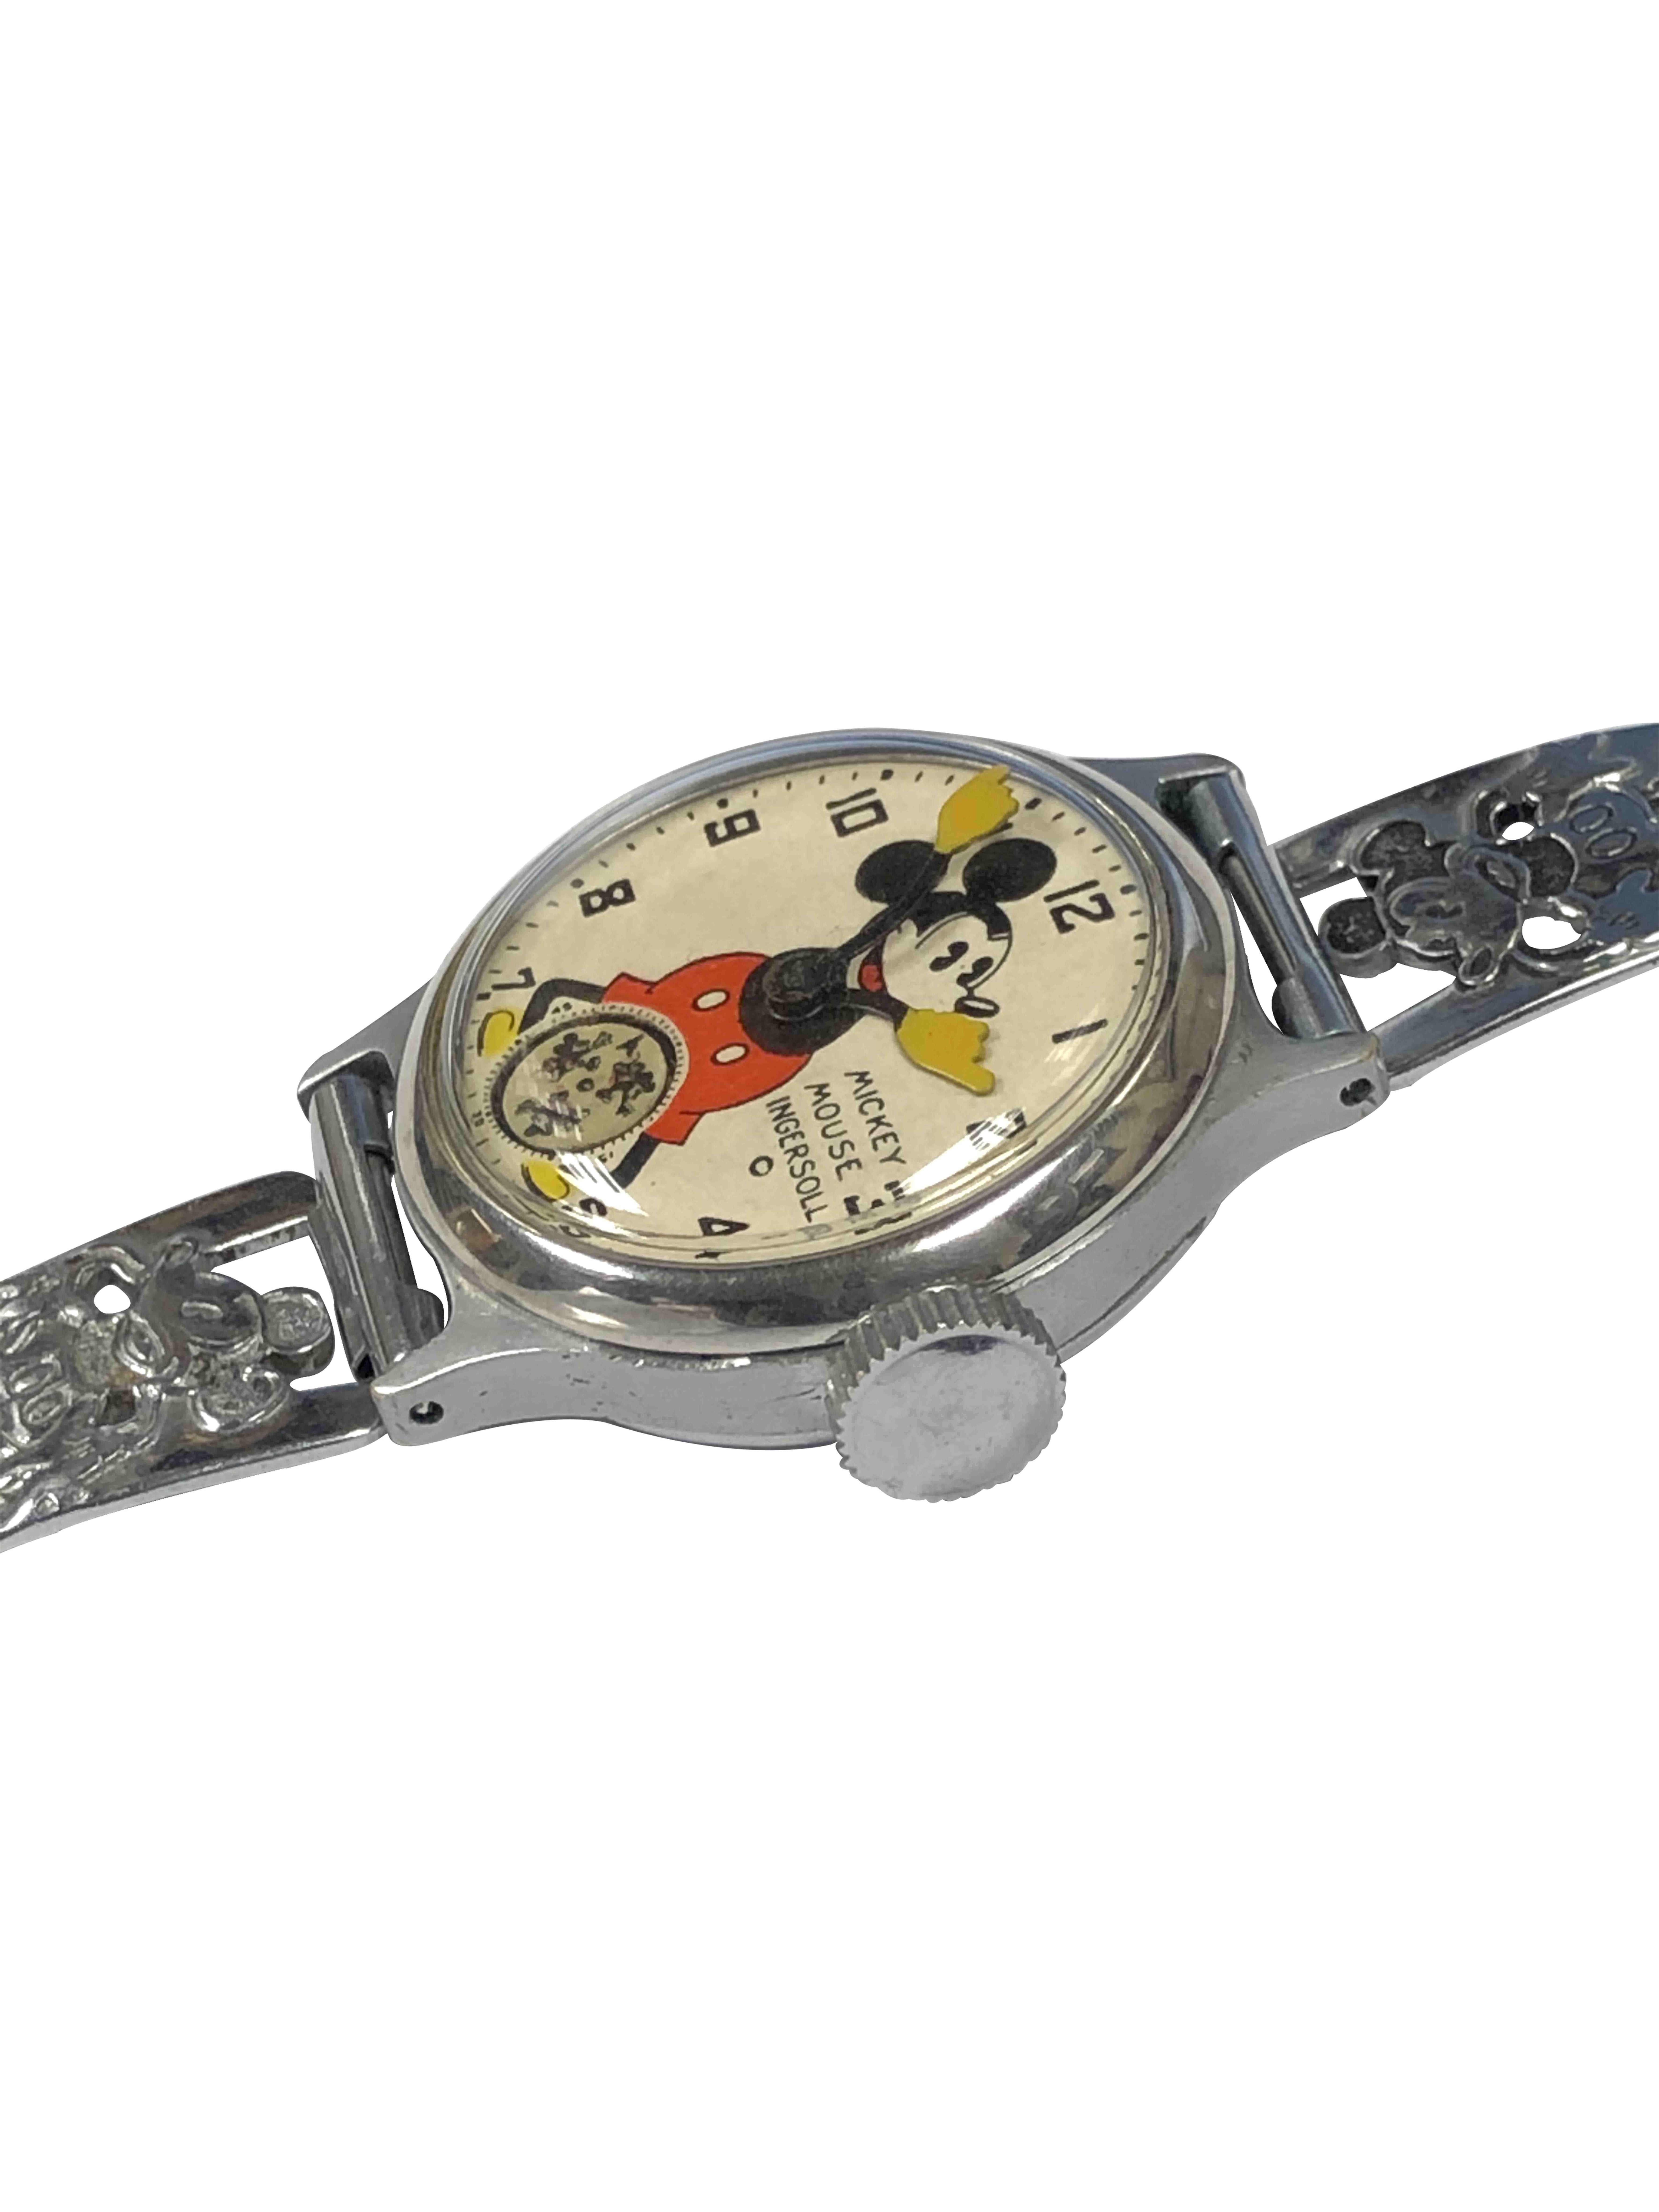 Circa 1933 Ingersoll Mickey Mouse Wrist Watch, This is the Watch that started it all, an incredible success in Marketing and a big money maker for both Disney and Ingersoll. over 2.5 Million were produced between 1933 to 1937. Chromed steel case